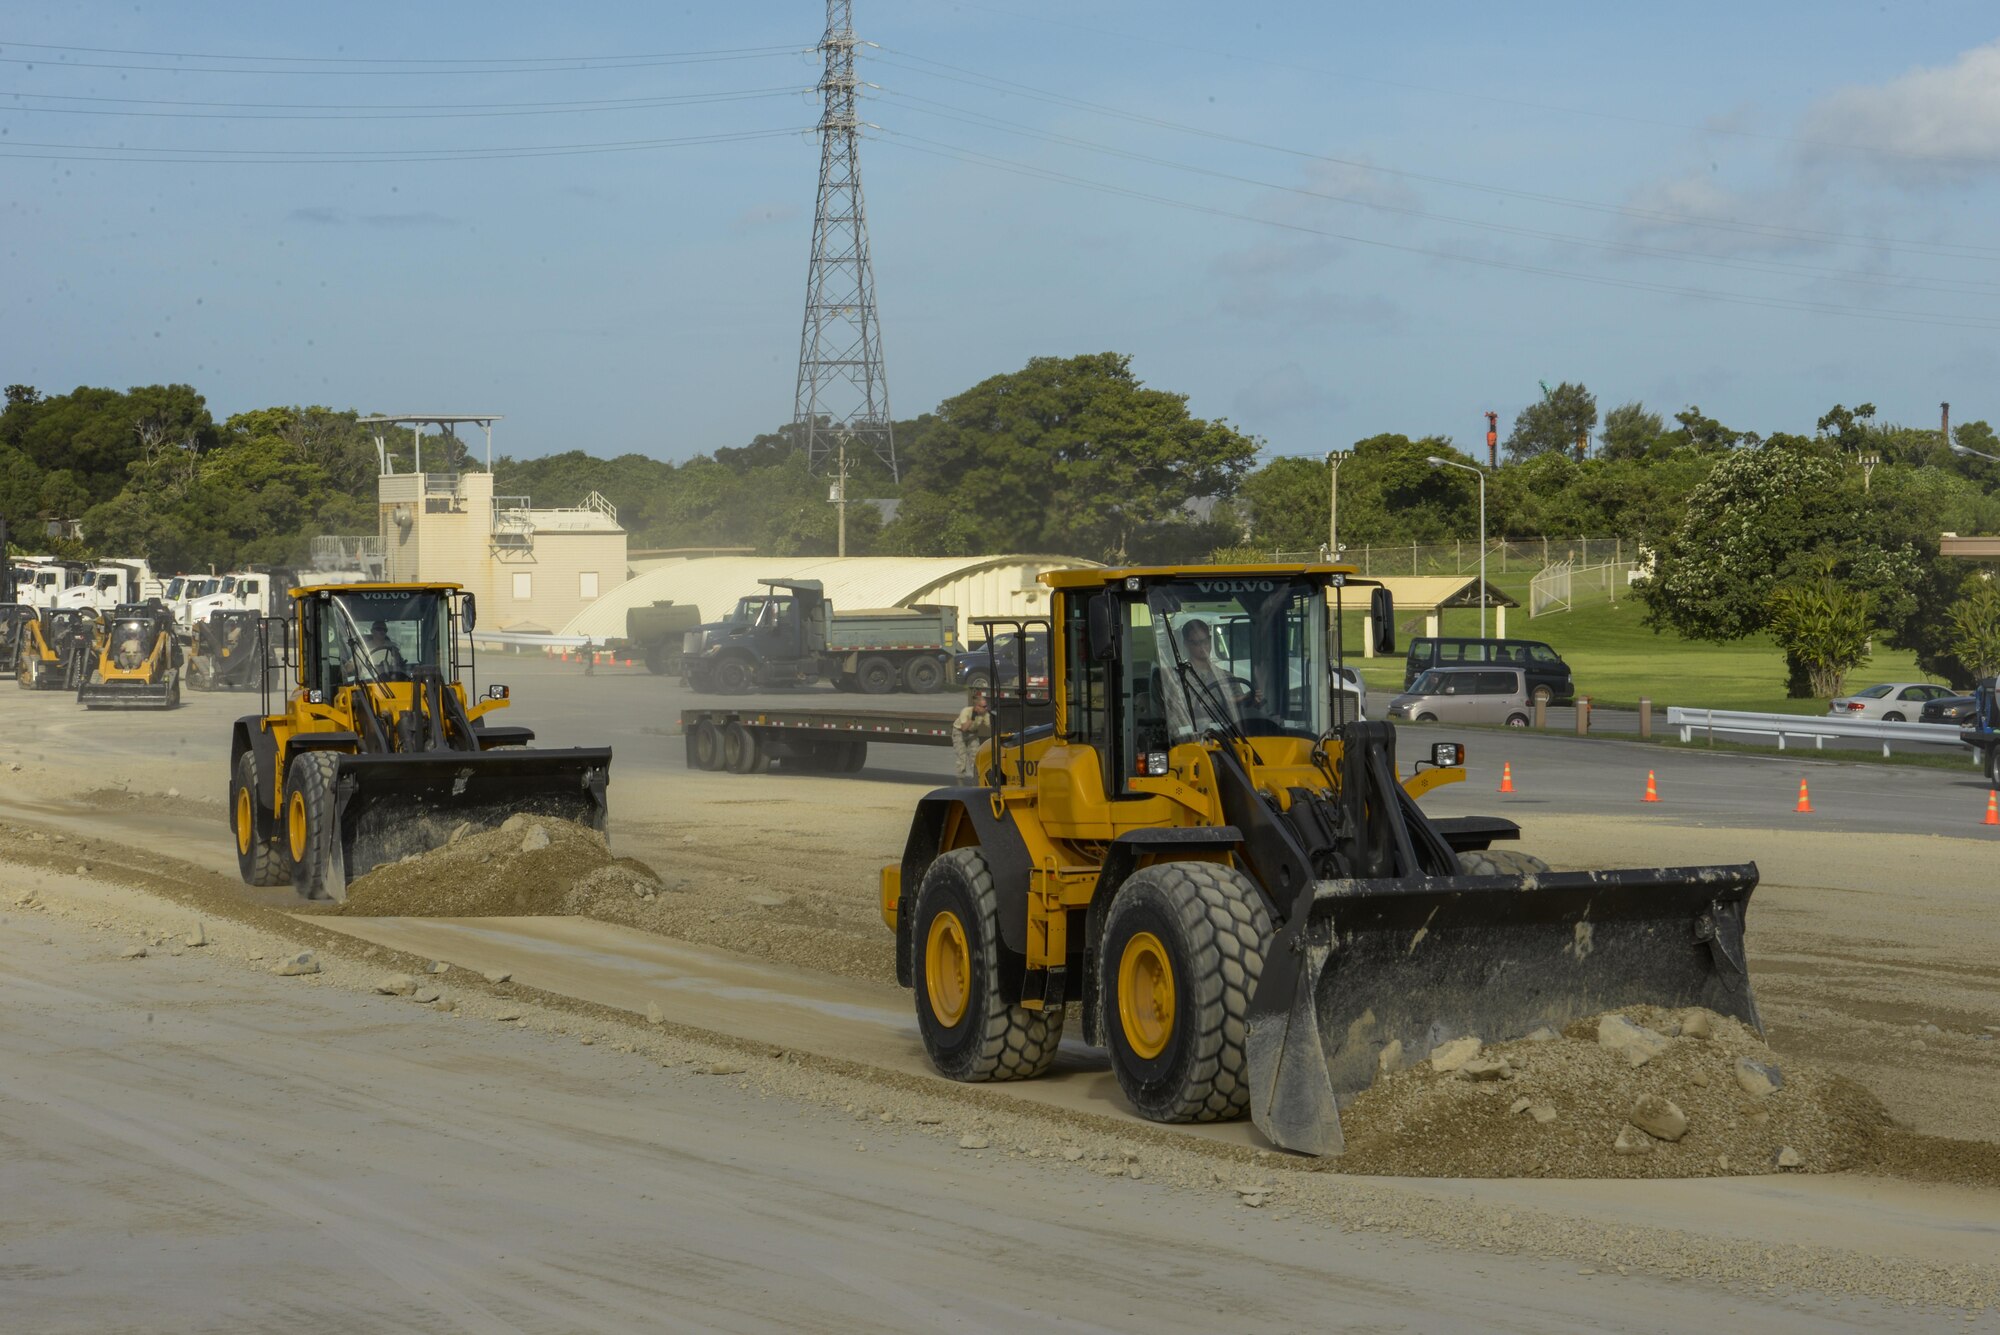 U.S. Air Force Airmen operate heavy machinery to clear debris away from a simulated damaged area created during rapid airfield damage repair training Sept, 15, 2016, at Kadena Air Base, Japan. U.S. Air Force Civil Engineer Squadrons from Kadena, Yakota and Misawa Air Bases teamed up with the Air Force Civil Engineer Center from Tyndall Air Force Base, Fla., to conduct training for the new rapid airfield damage repair (RADR) technique Sept. 12-15. (U.S. Air Force photo by Senior Airman Stephen G. Eigel)